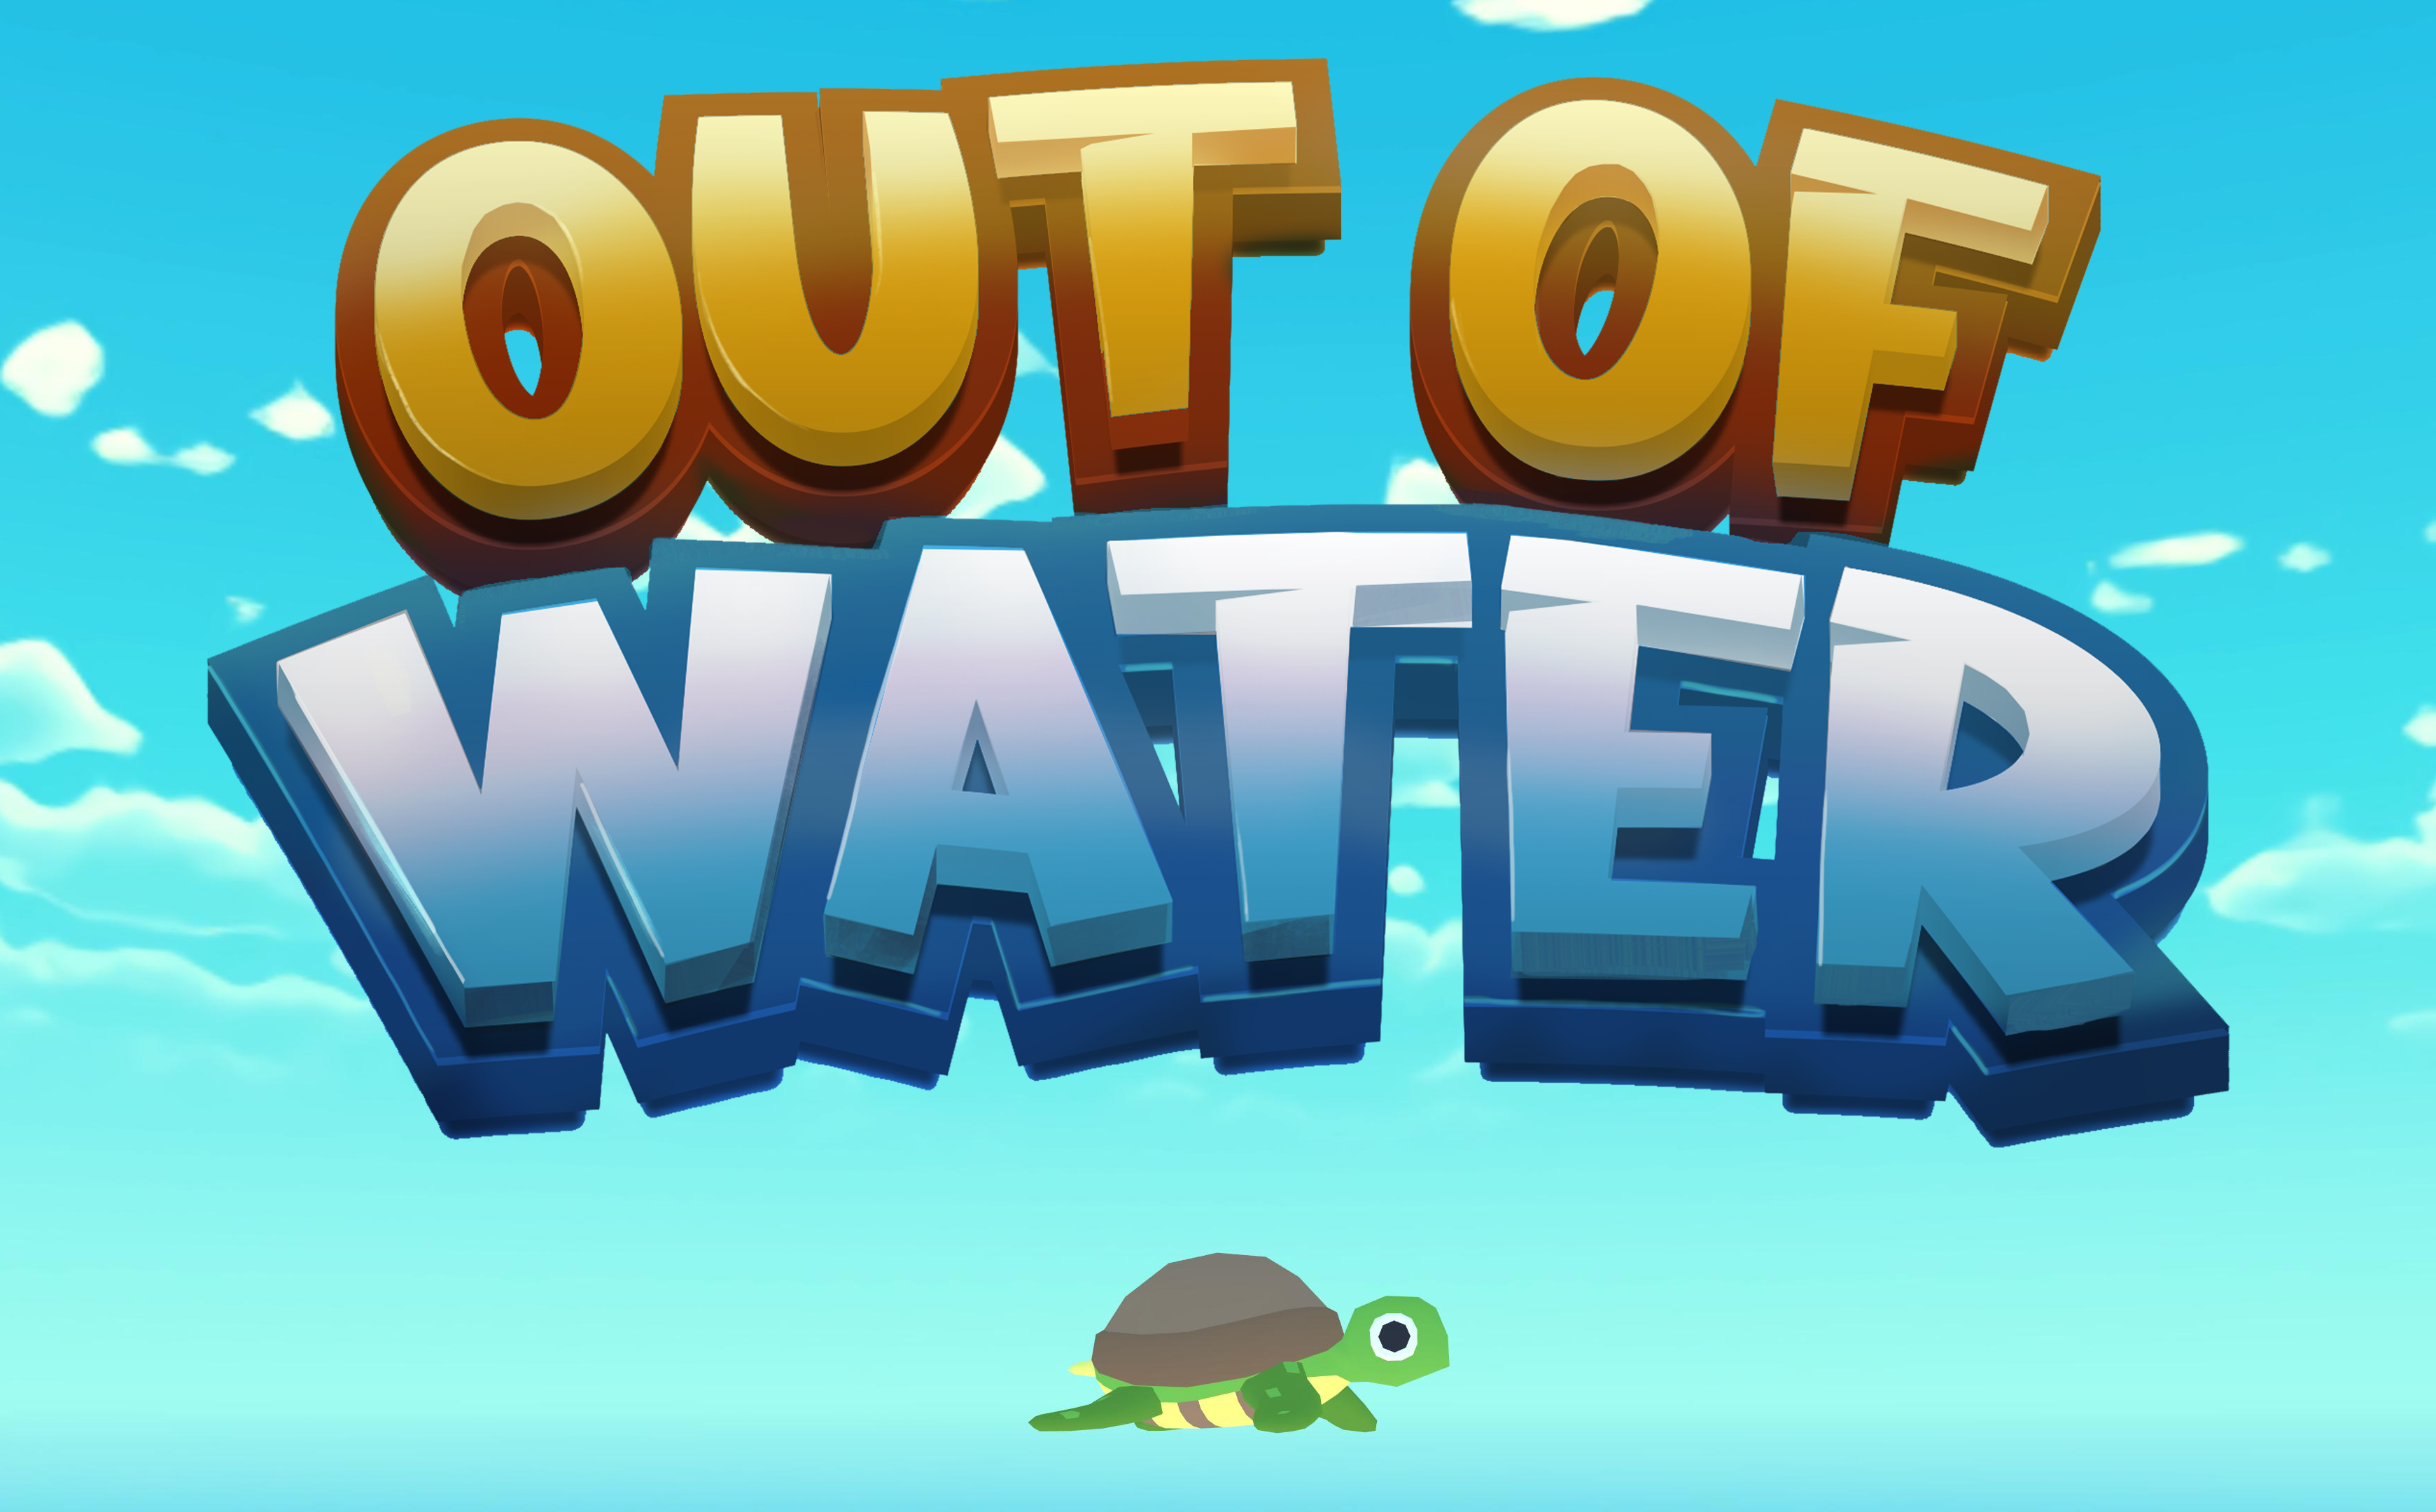 Out Of Water